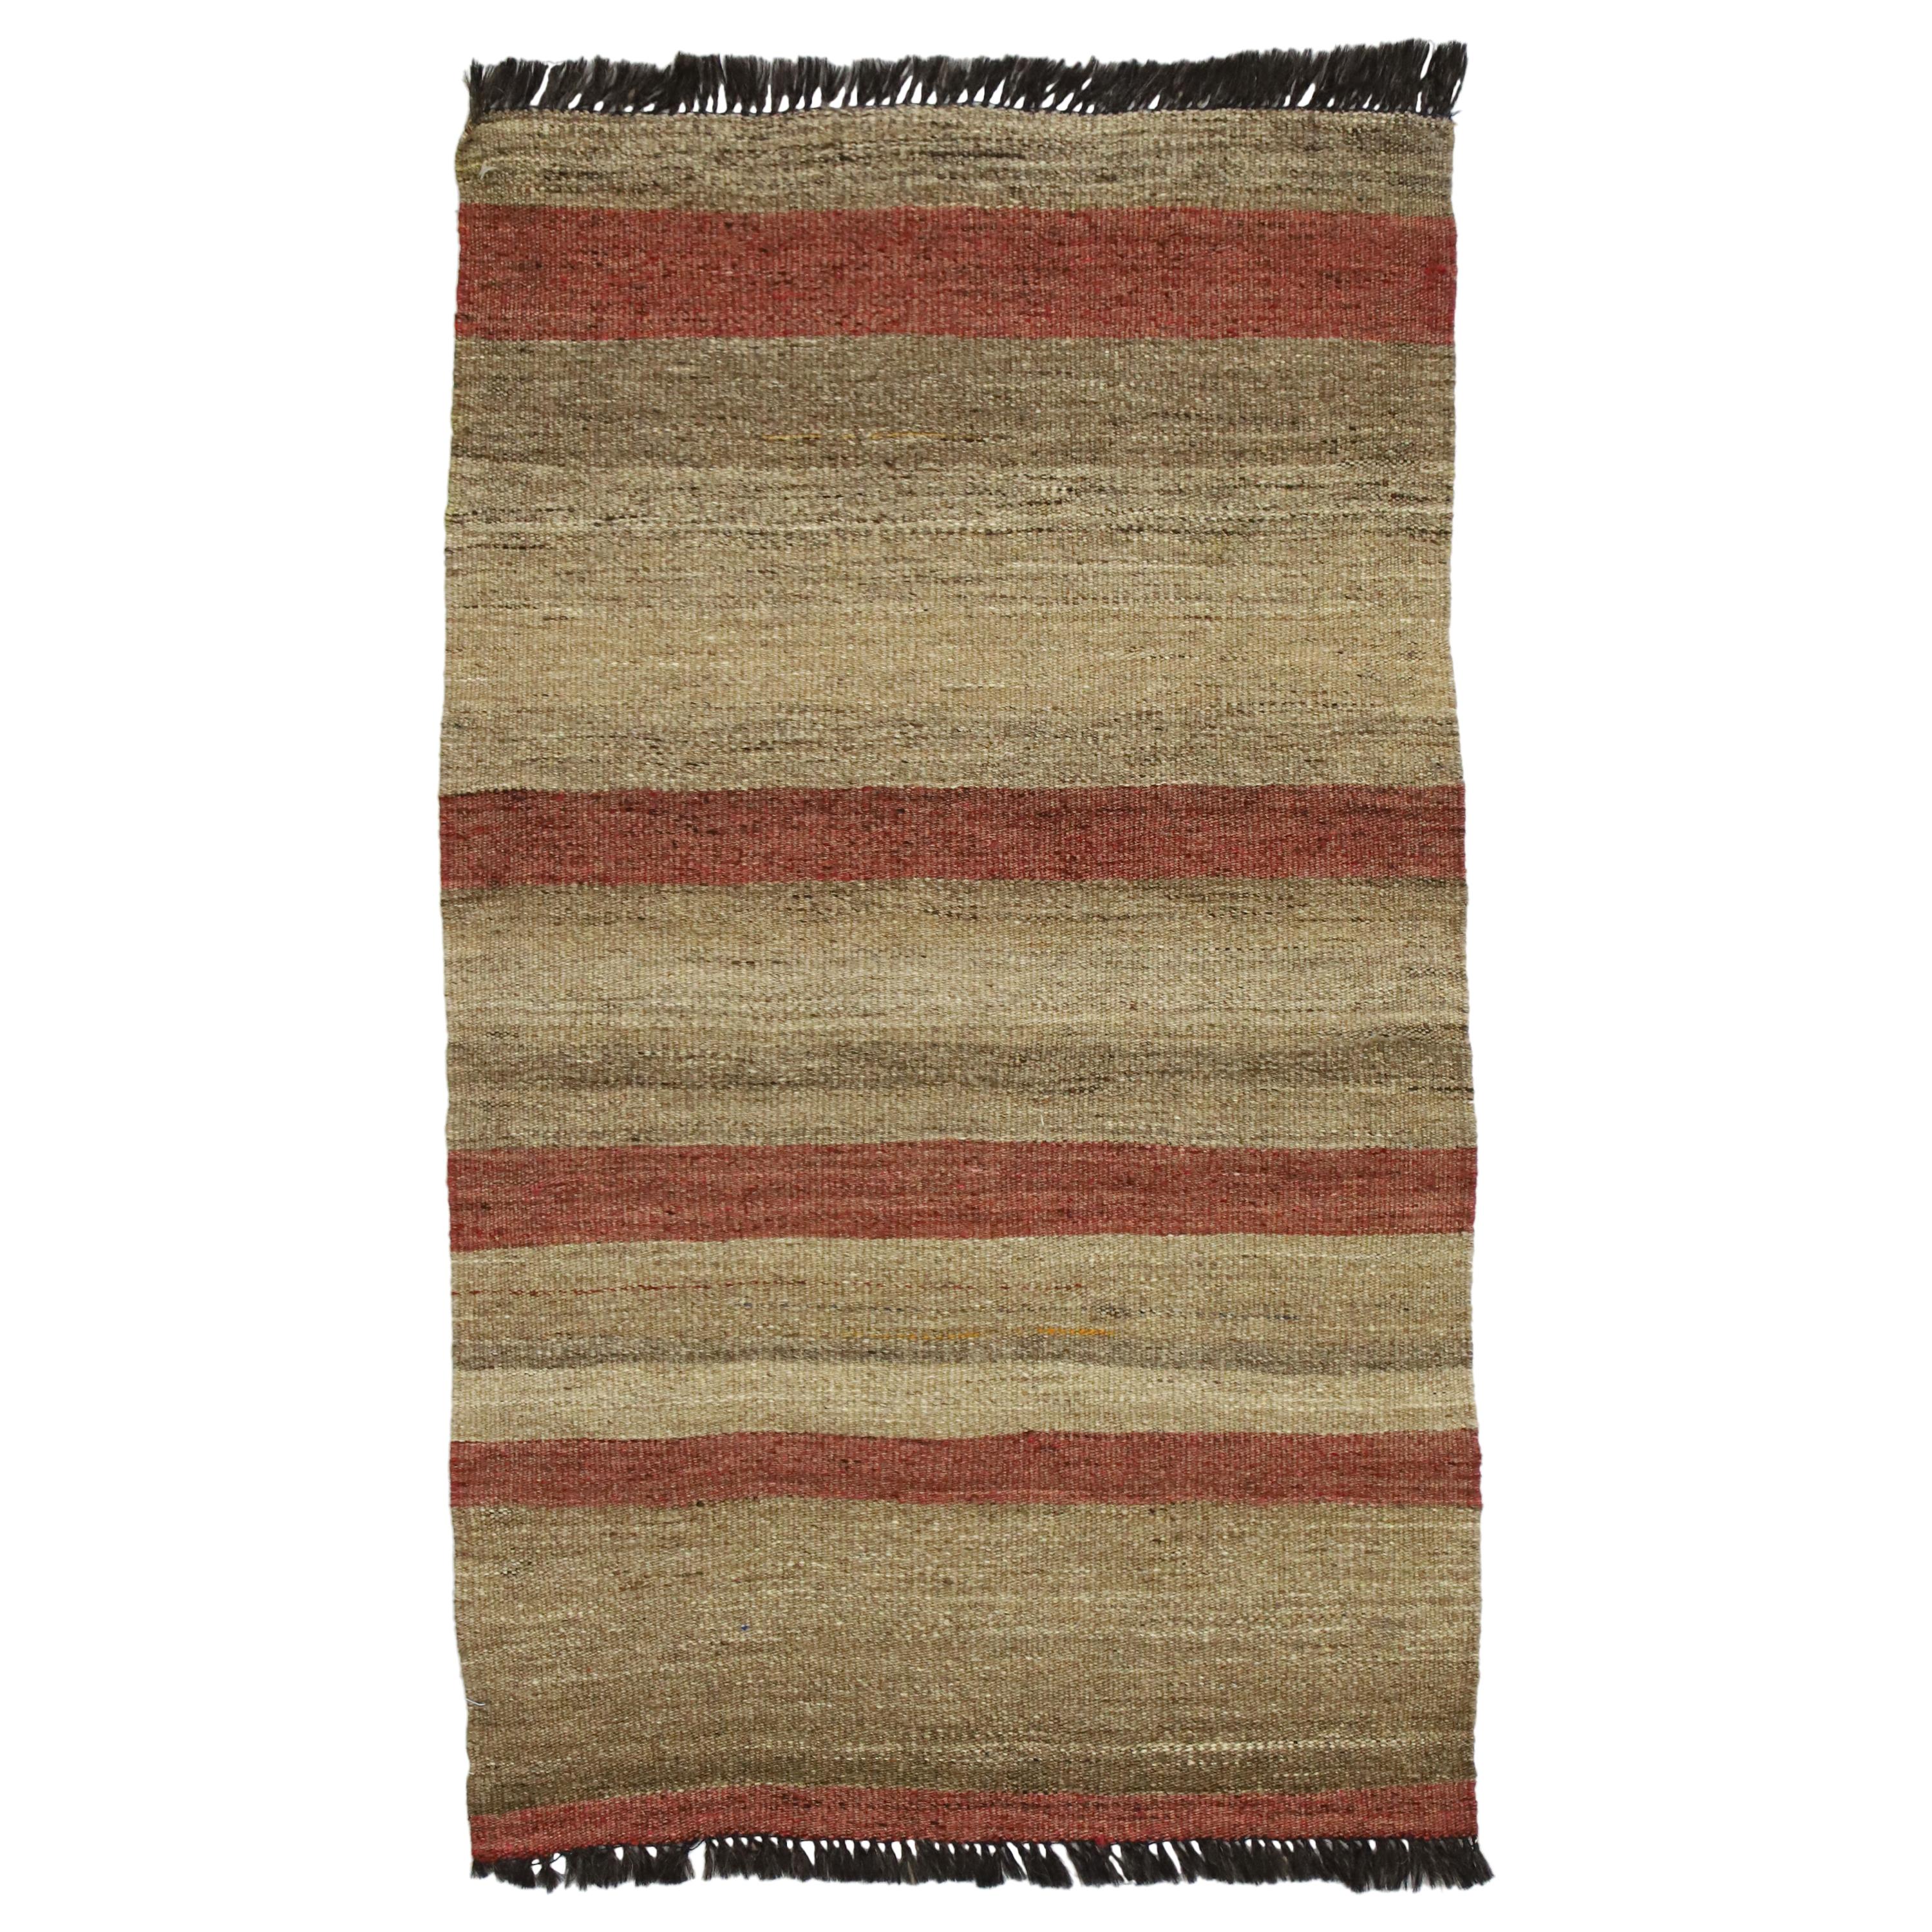 Vintage Turkish Kilim Accent Rug with Earth Tone Colors, Small Flat-Weave Rug